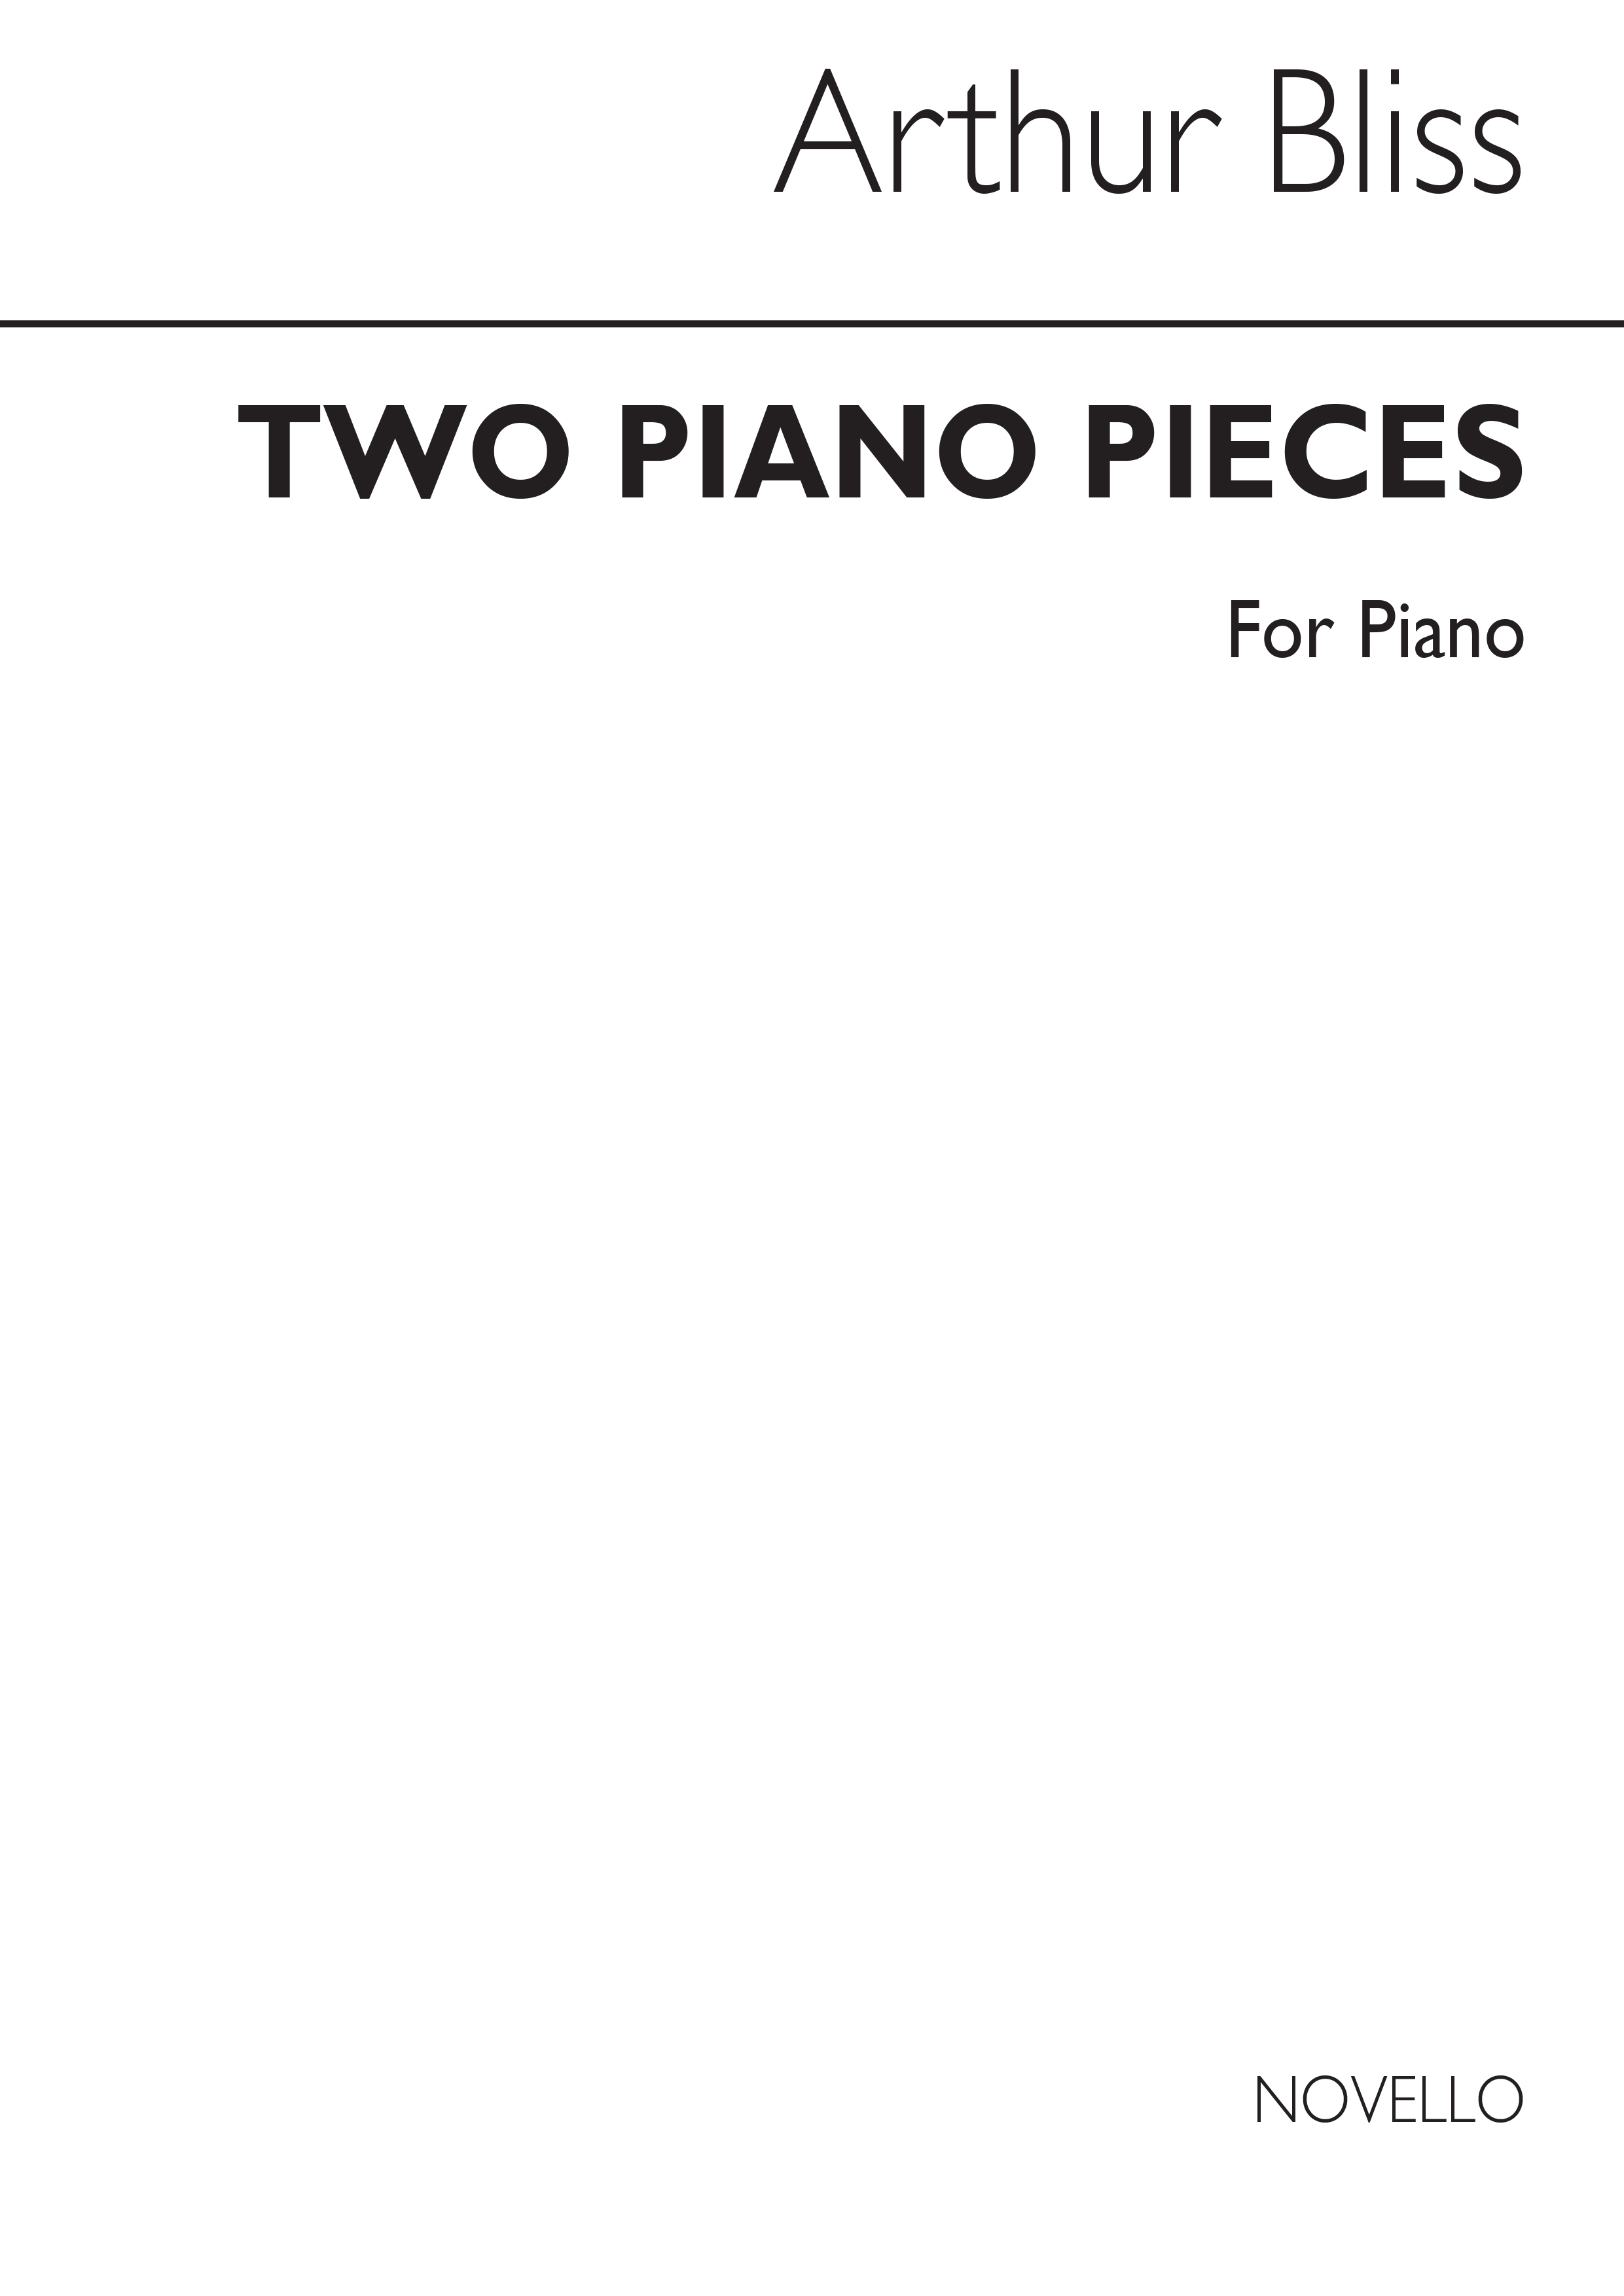 Bliss: Two Piano Pieces